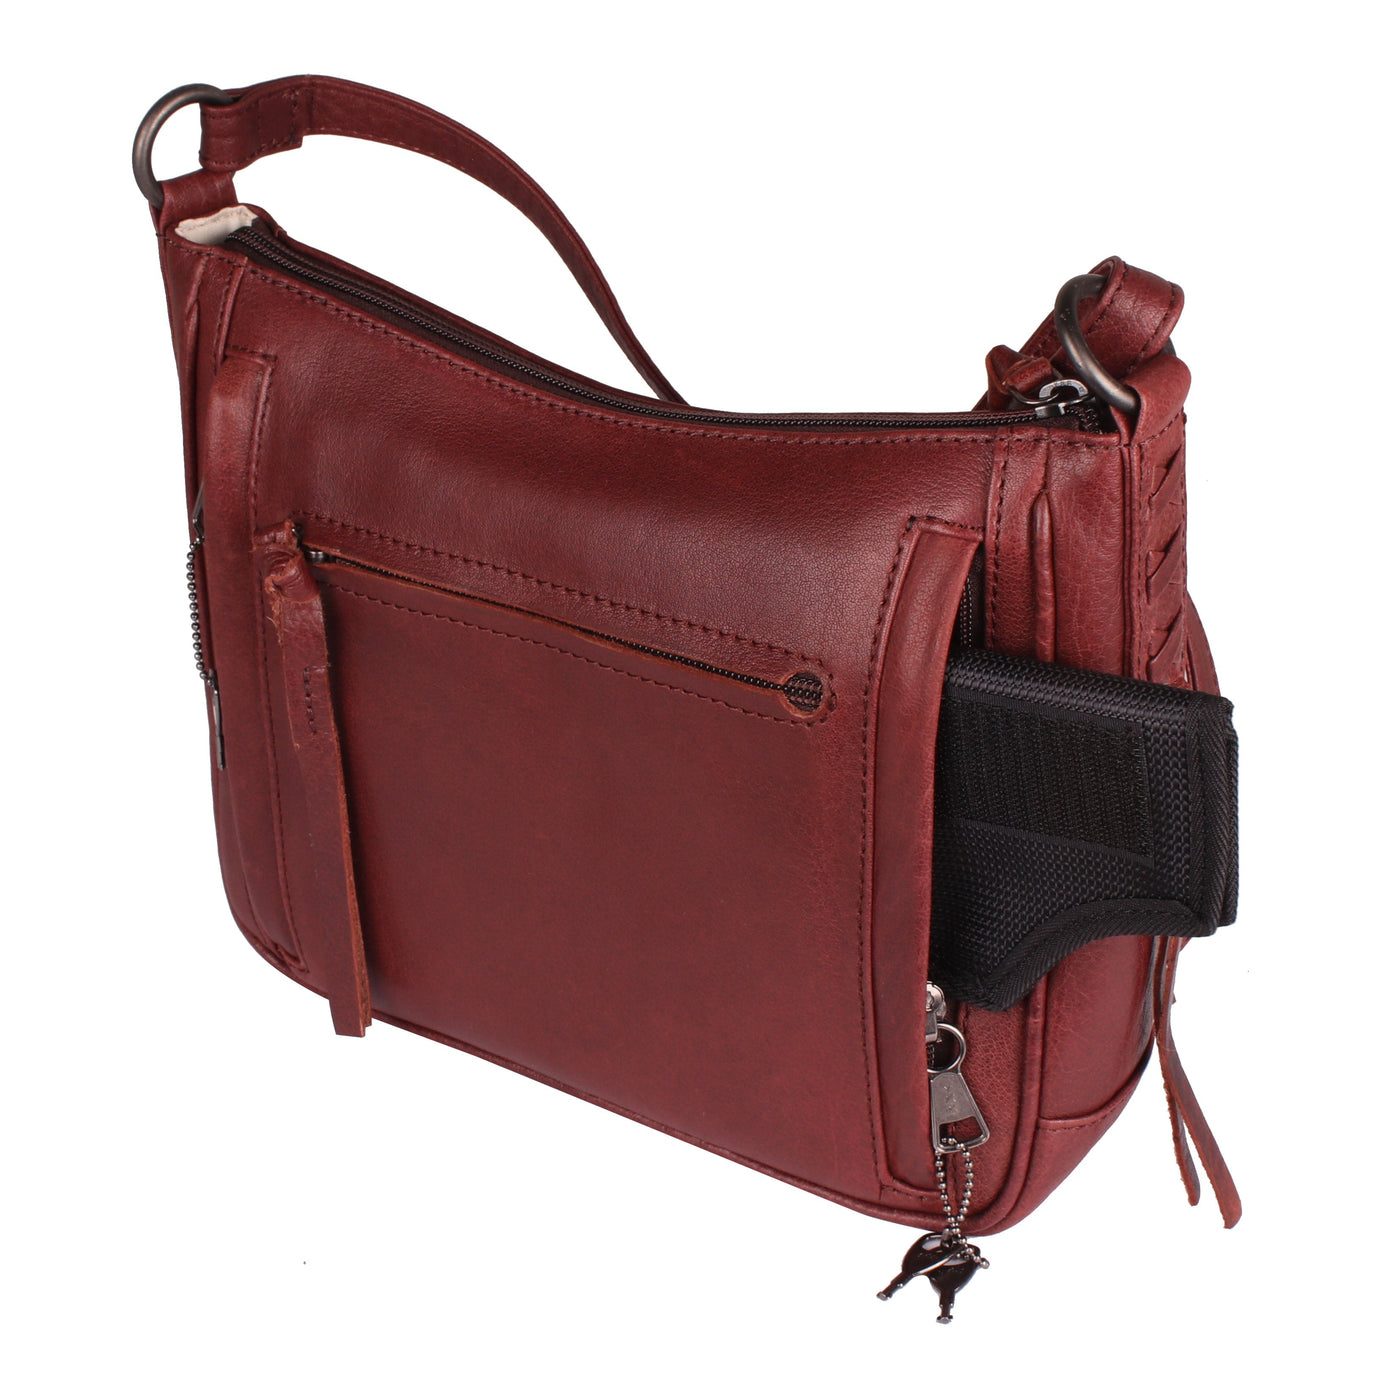 Concealed Carry Callie Leather Crossbody - YKK Locking Bag Red with Universal Holster for Pistol and Guns